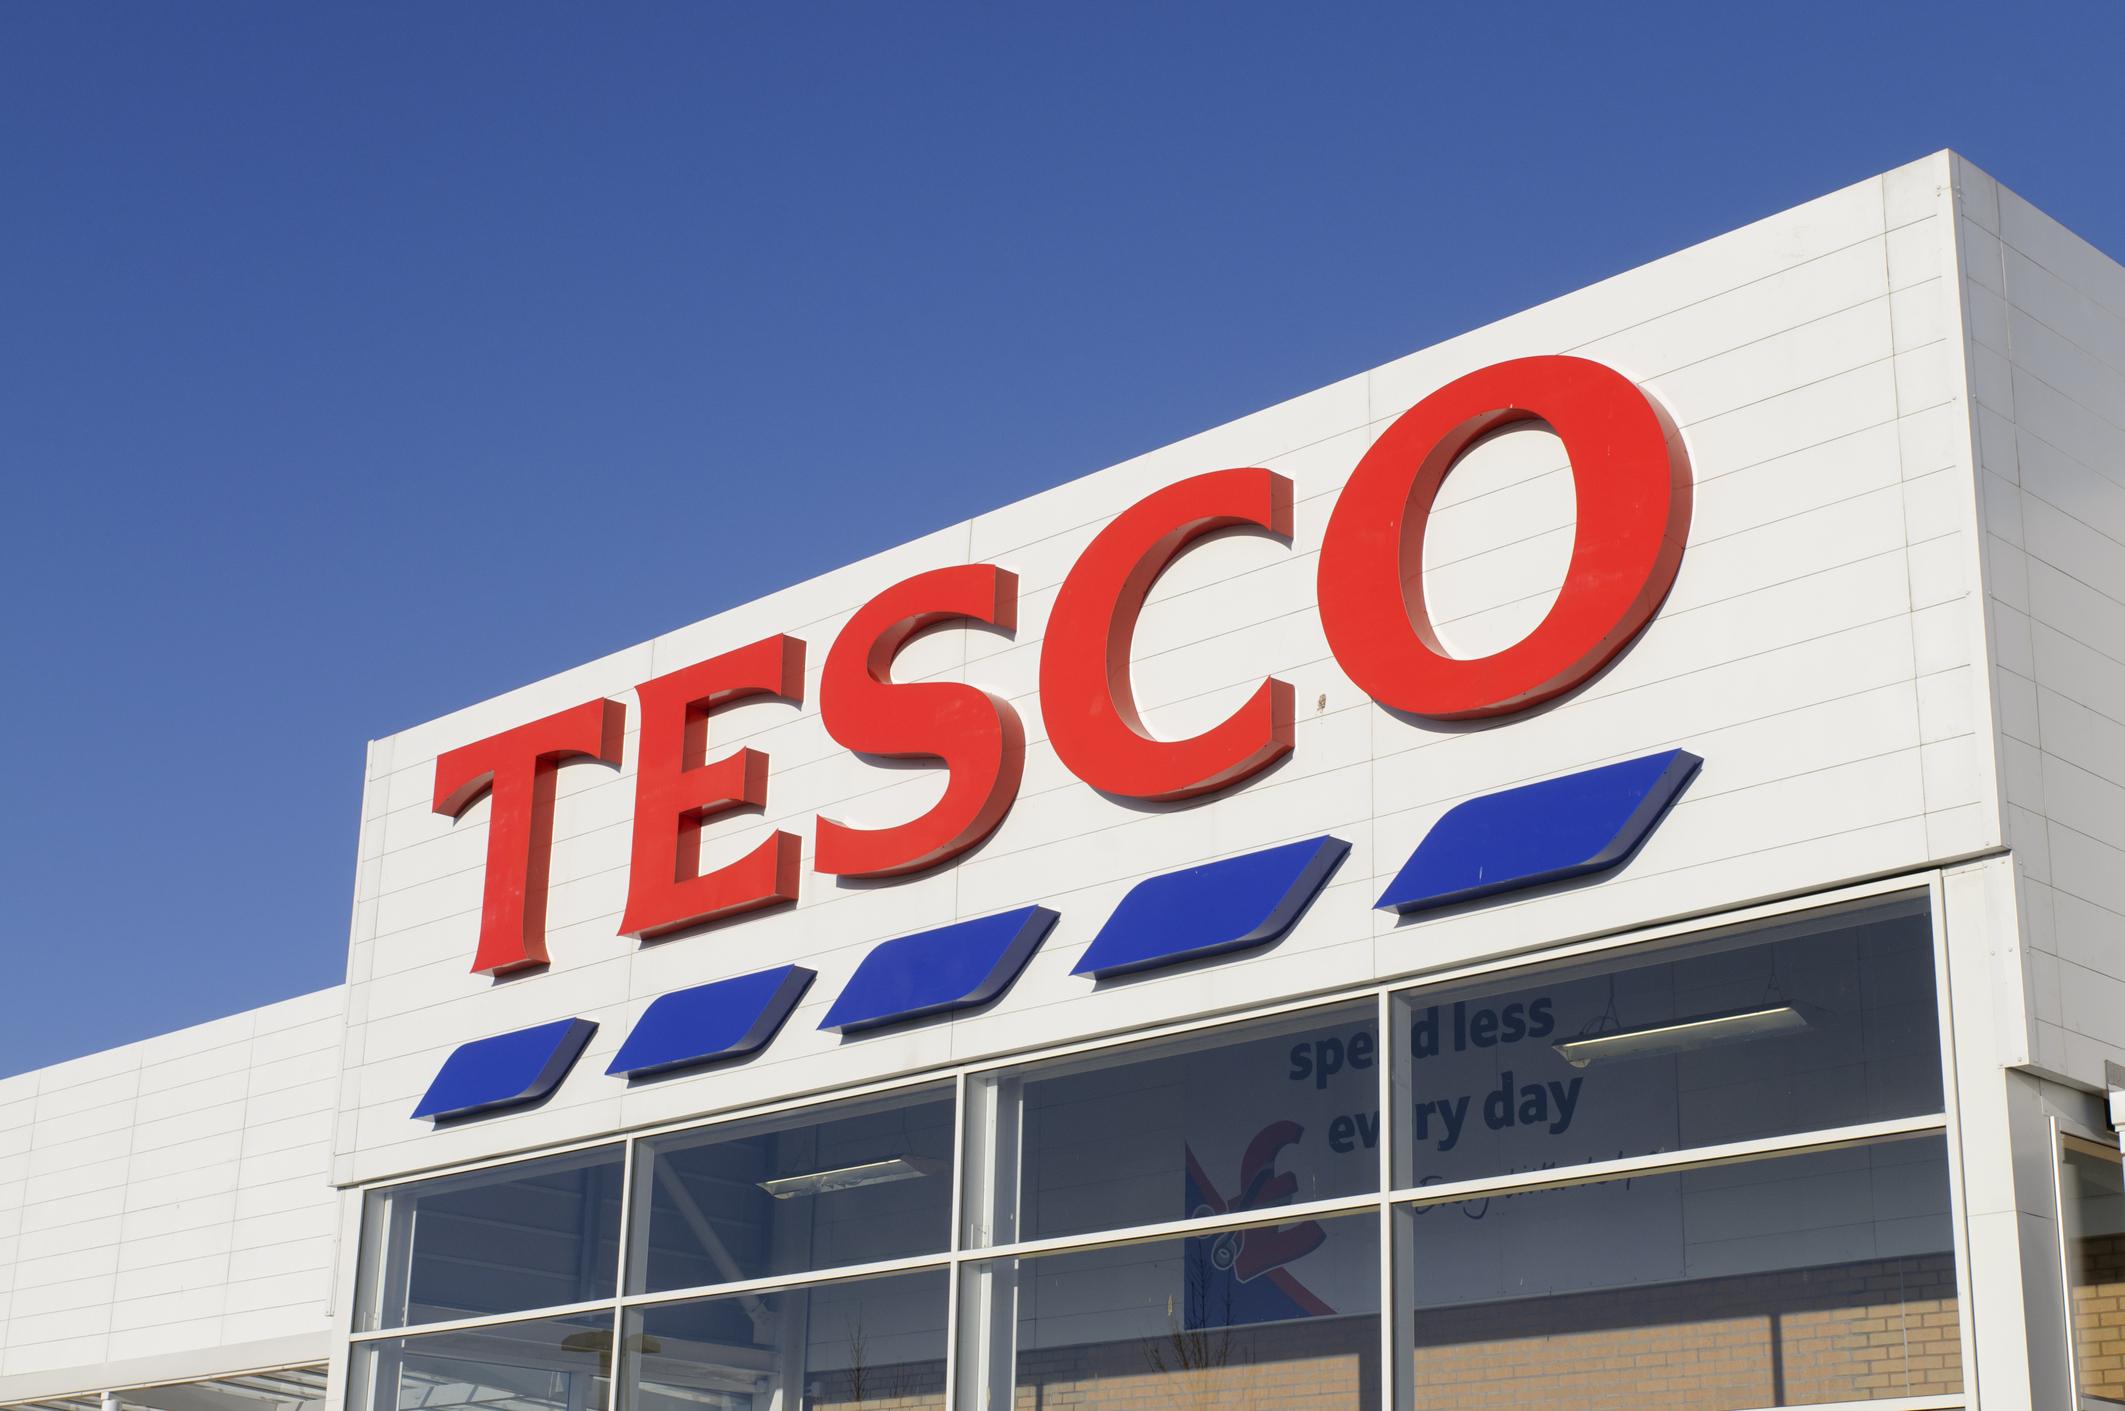 Booker/Tesco officially cleared by CMA